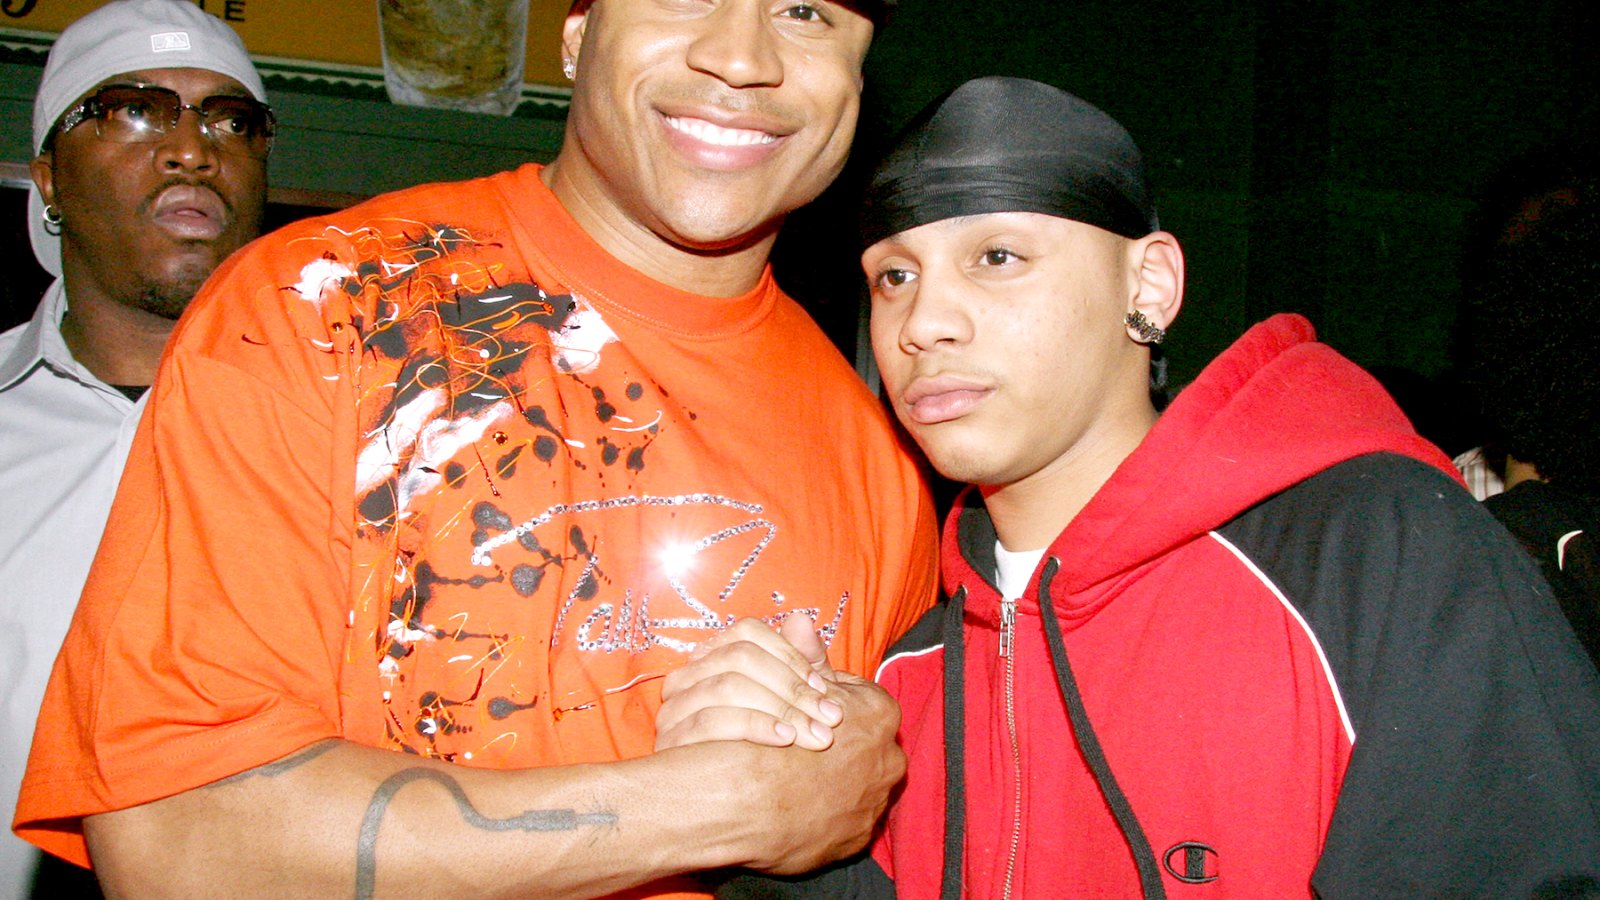 LL Cool J and his son Najee Smith